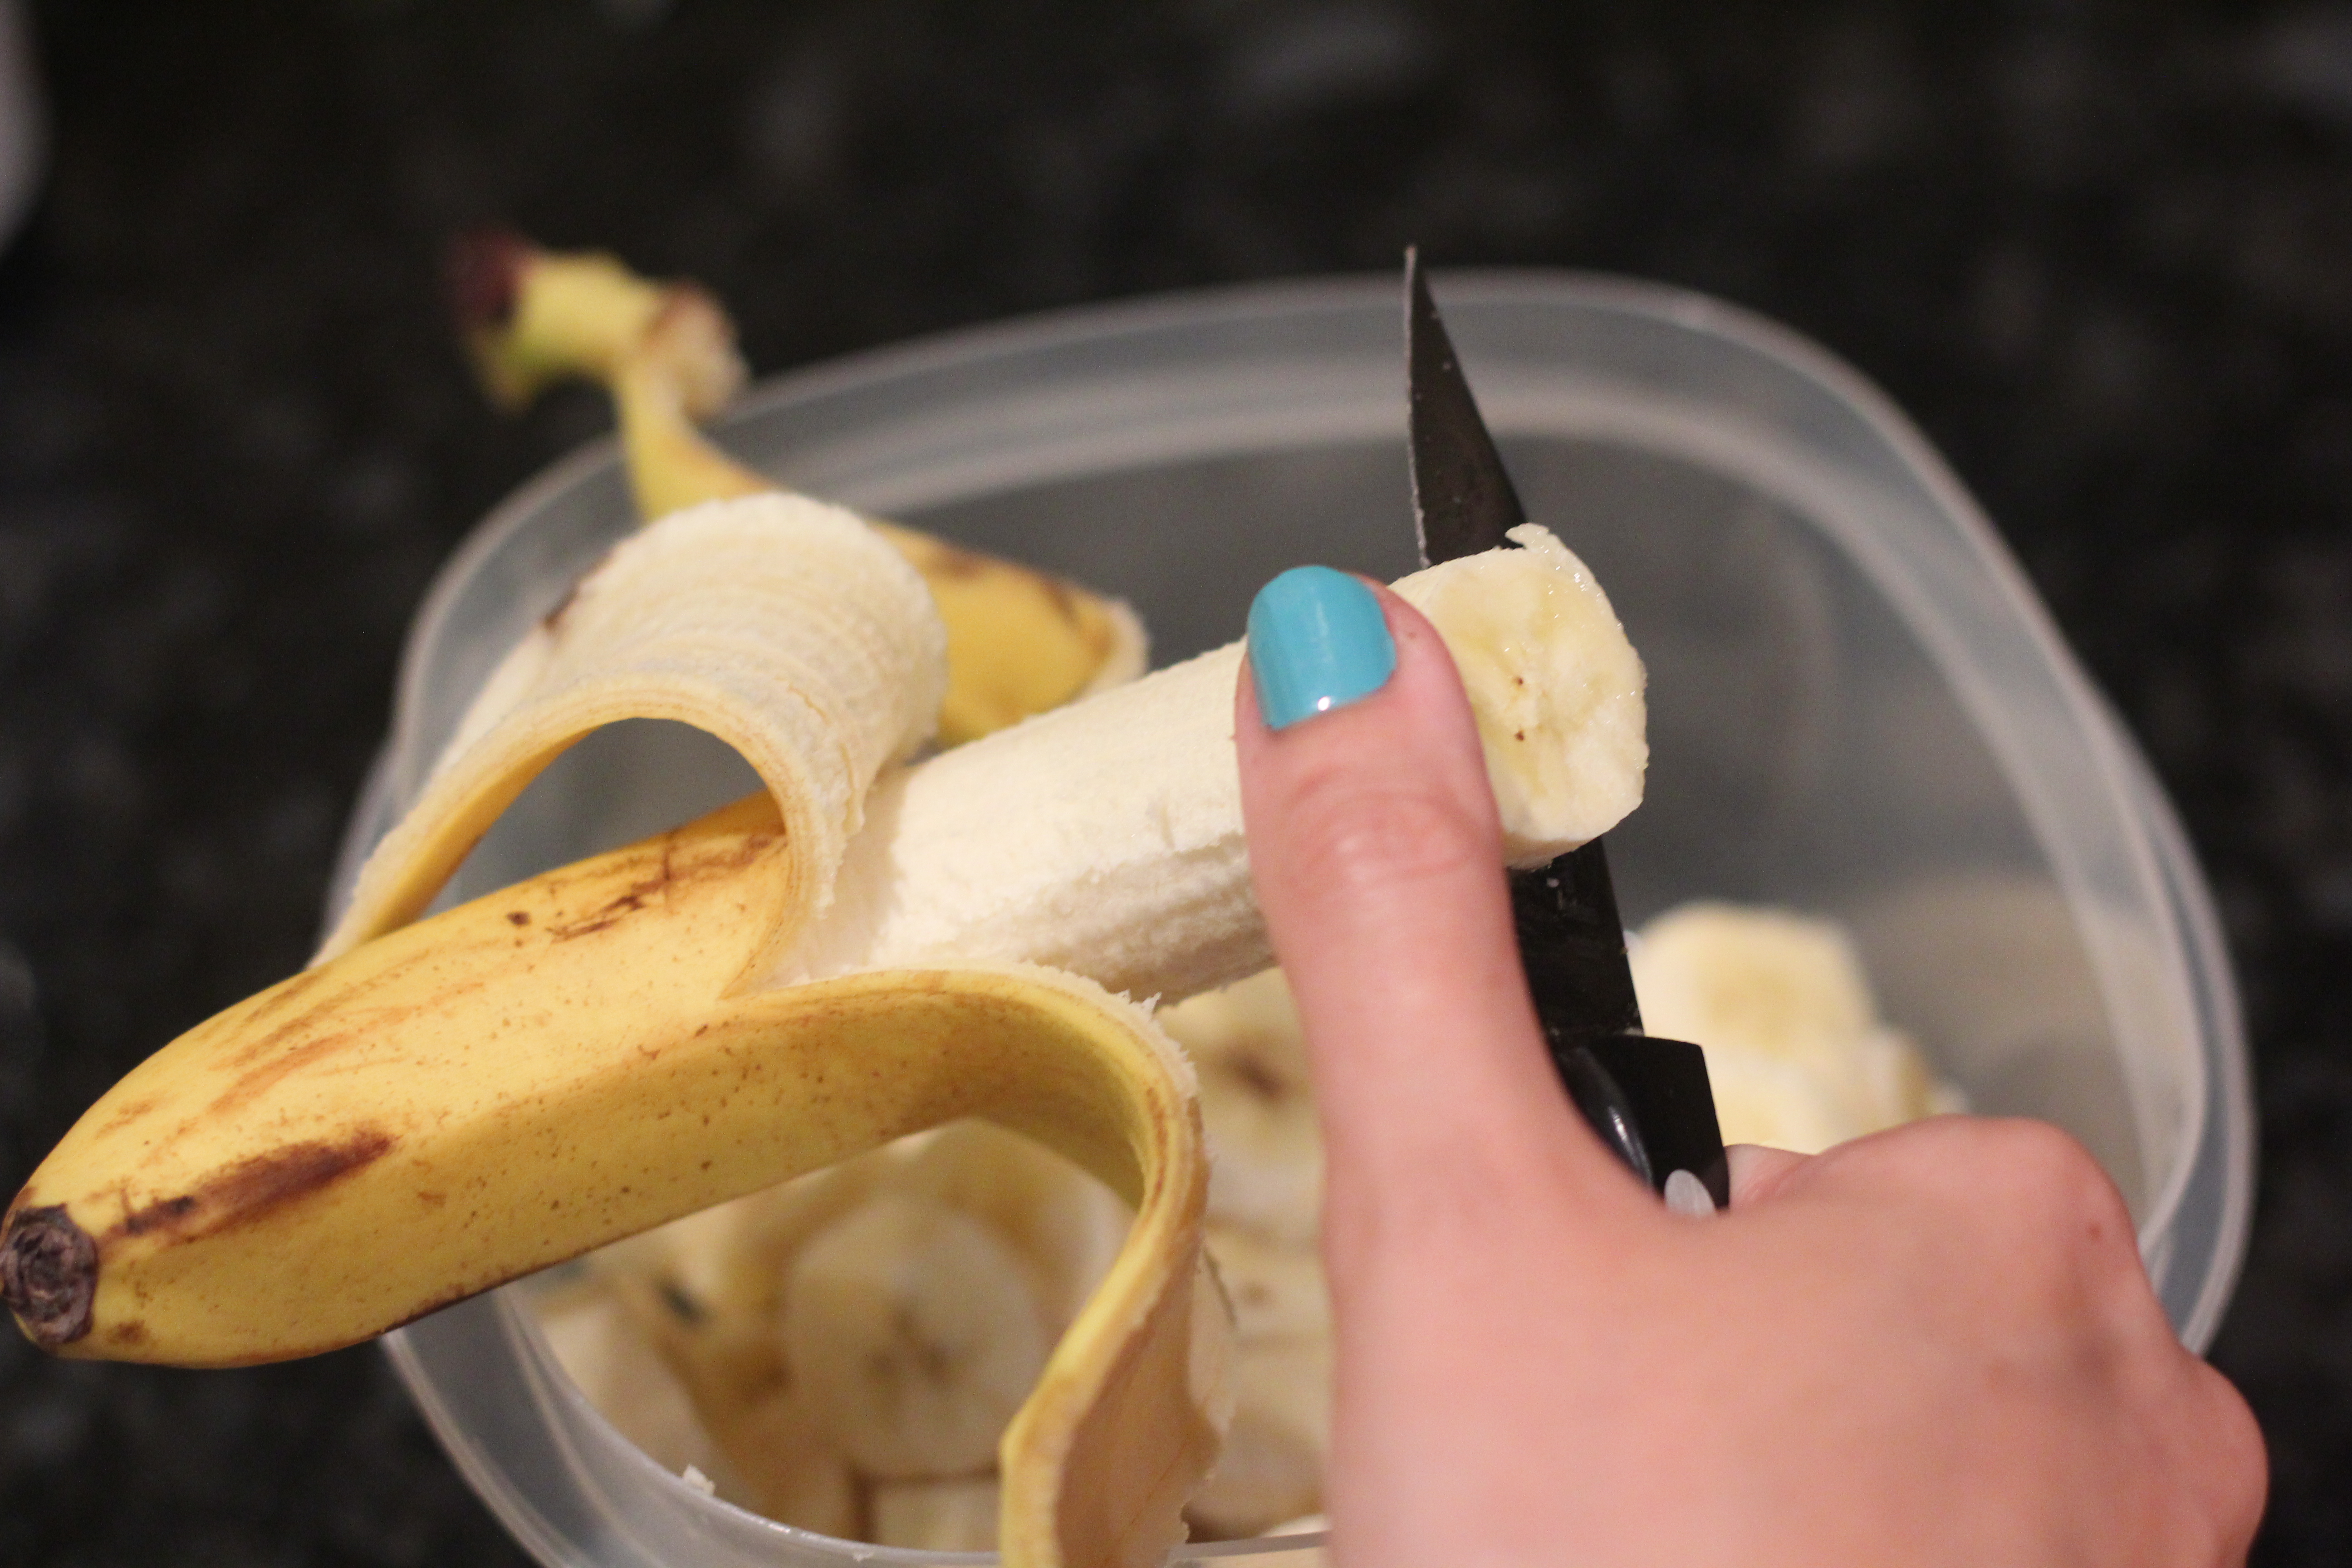 Slicing ripe bananas for Banana Peanut Butter Ice Cream @ bestwithchocolate.com